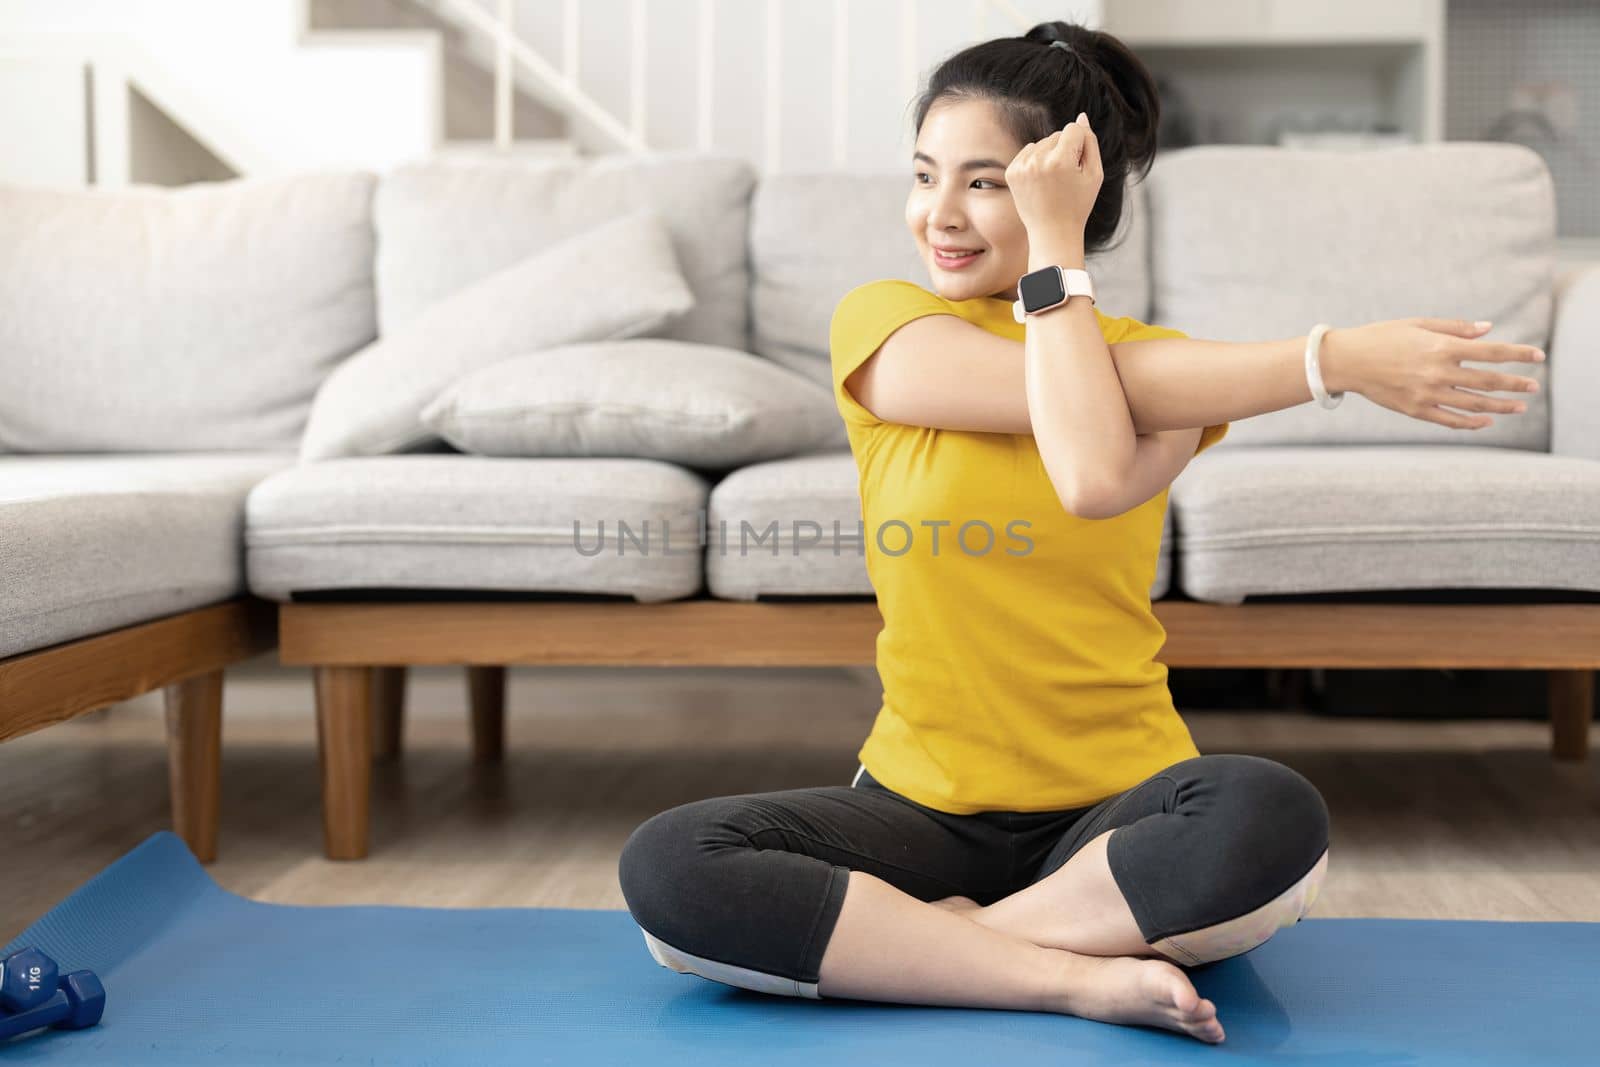 Attractive young woman doing yoga stretching yoga online at home. Self-isolation is beneficial. Healthy lifestyle concept by nateemee